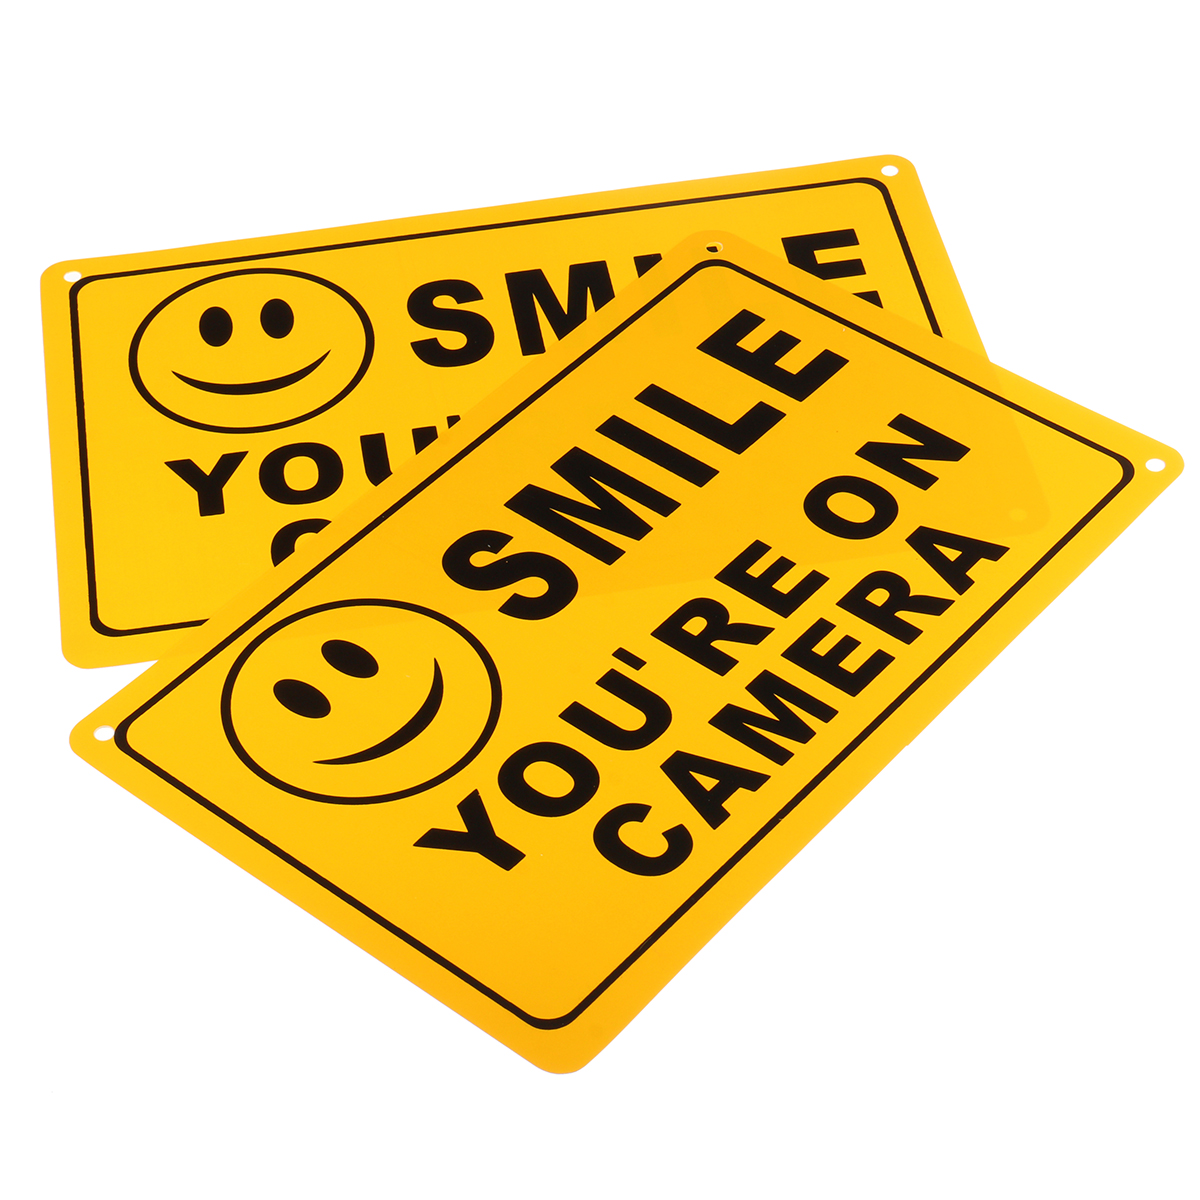 2Pcs-SMILE-YOURE-ON-CAMERA-Warning-Security-Yellow-Sign-CCTV-Video-Surveillance-Camera-Sticker-28x18-1180754-1